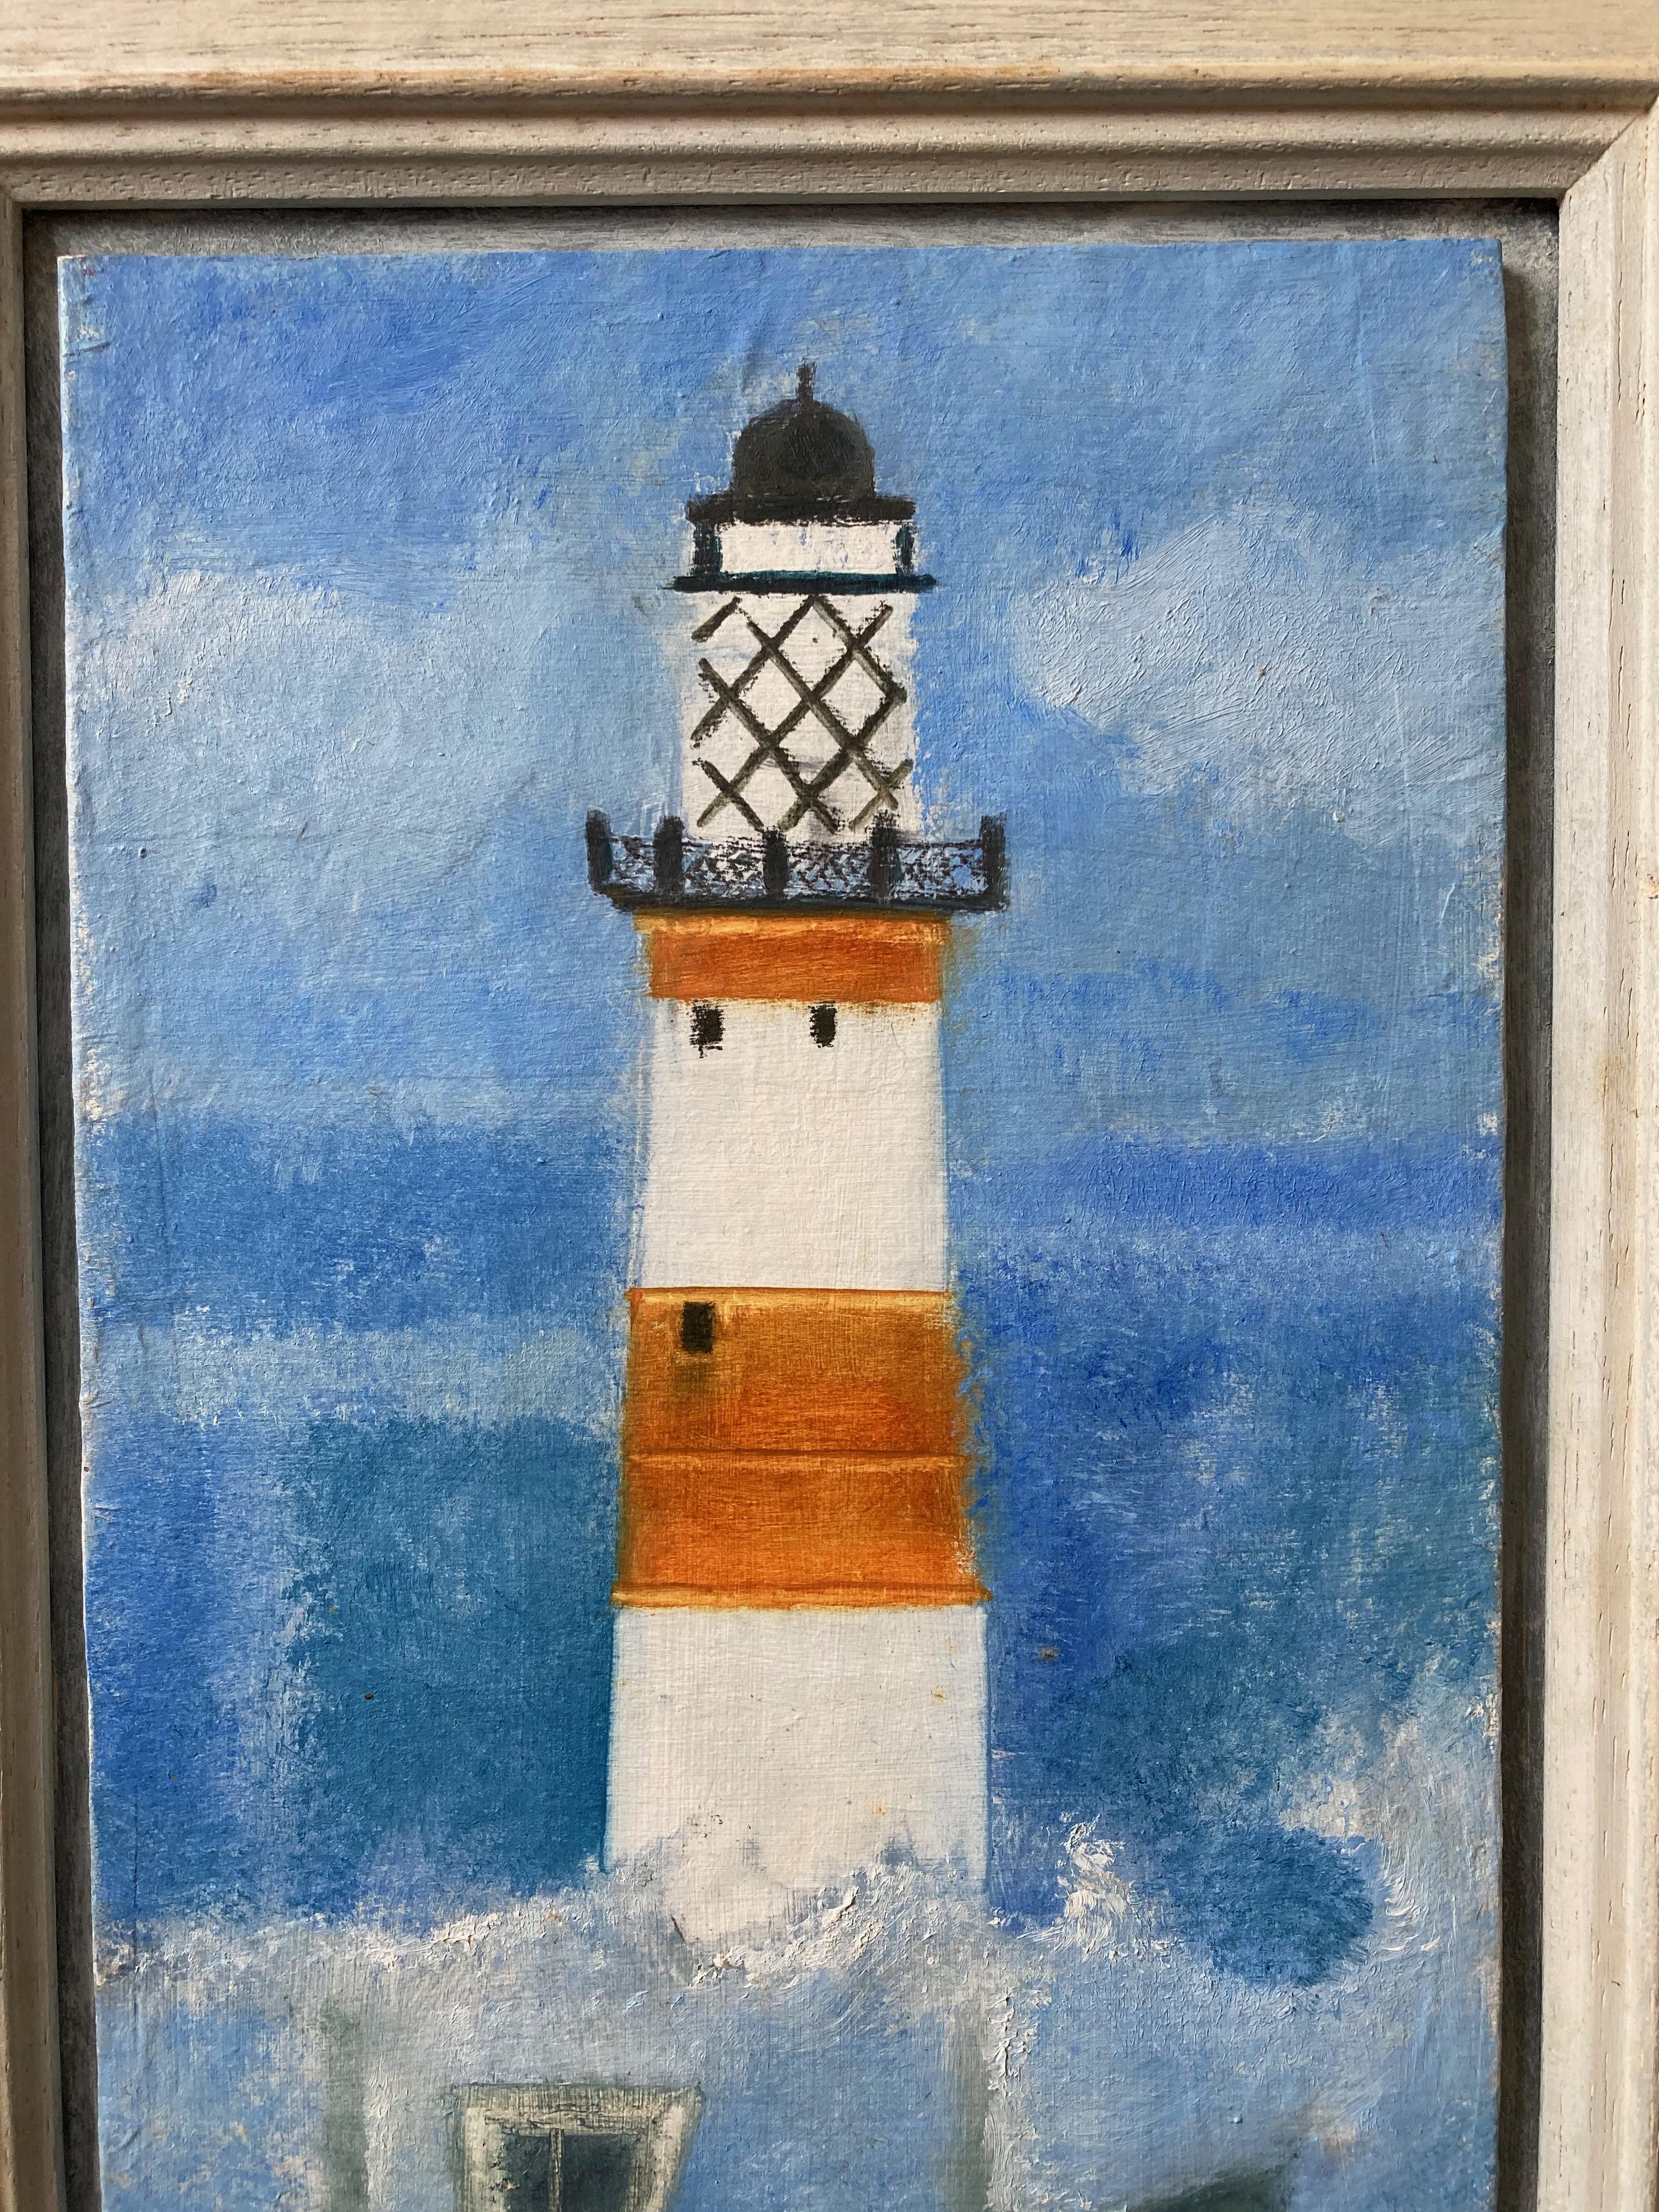 Caroline McAdam Clark, Contemporary
The Lighthouse
Signed
Oil on board
8 x 5 inches
14 x 11 inches with the frame.